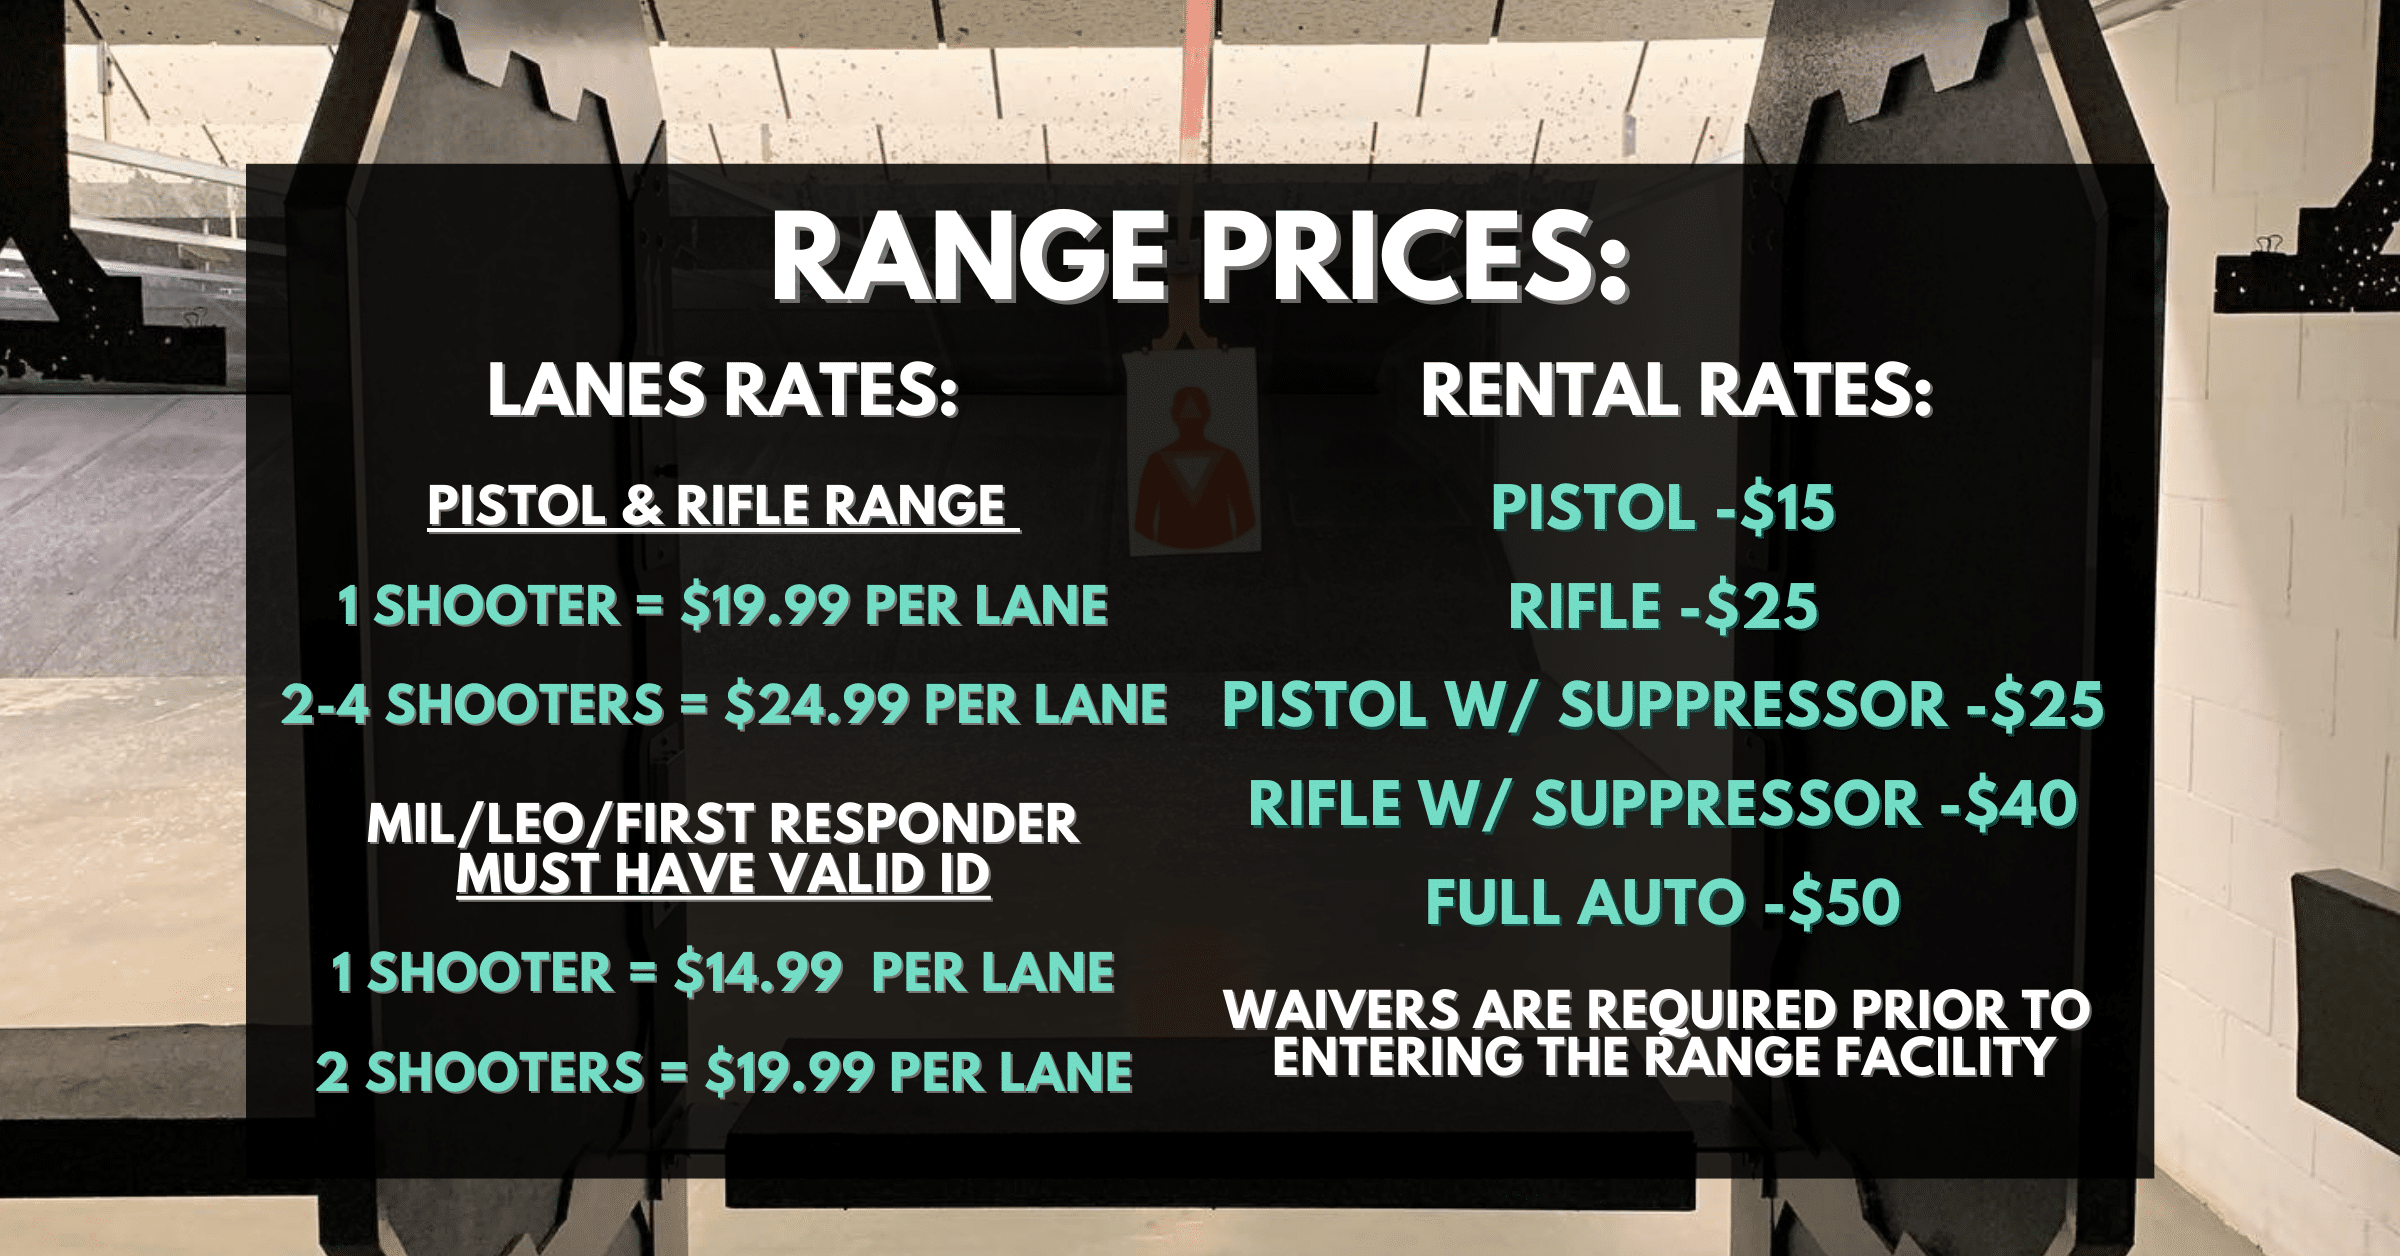 Range Prices. All must sign waiver before entering the range facility.